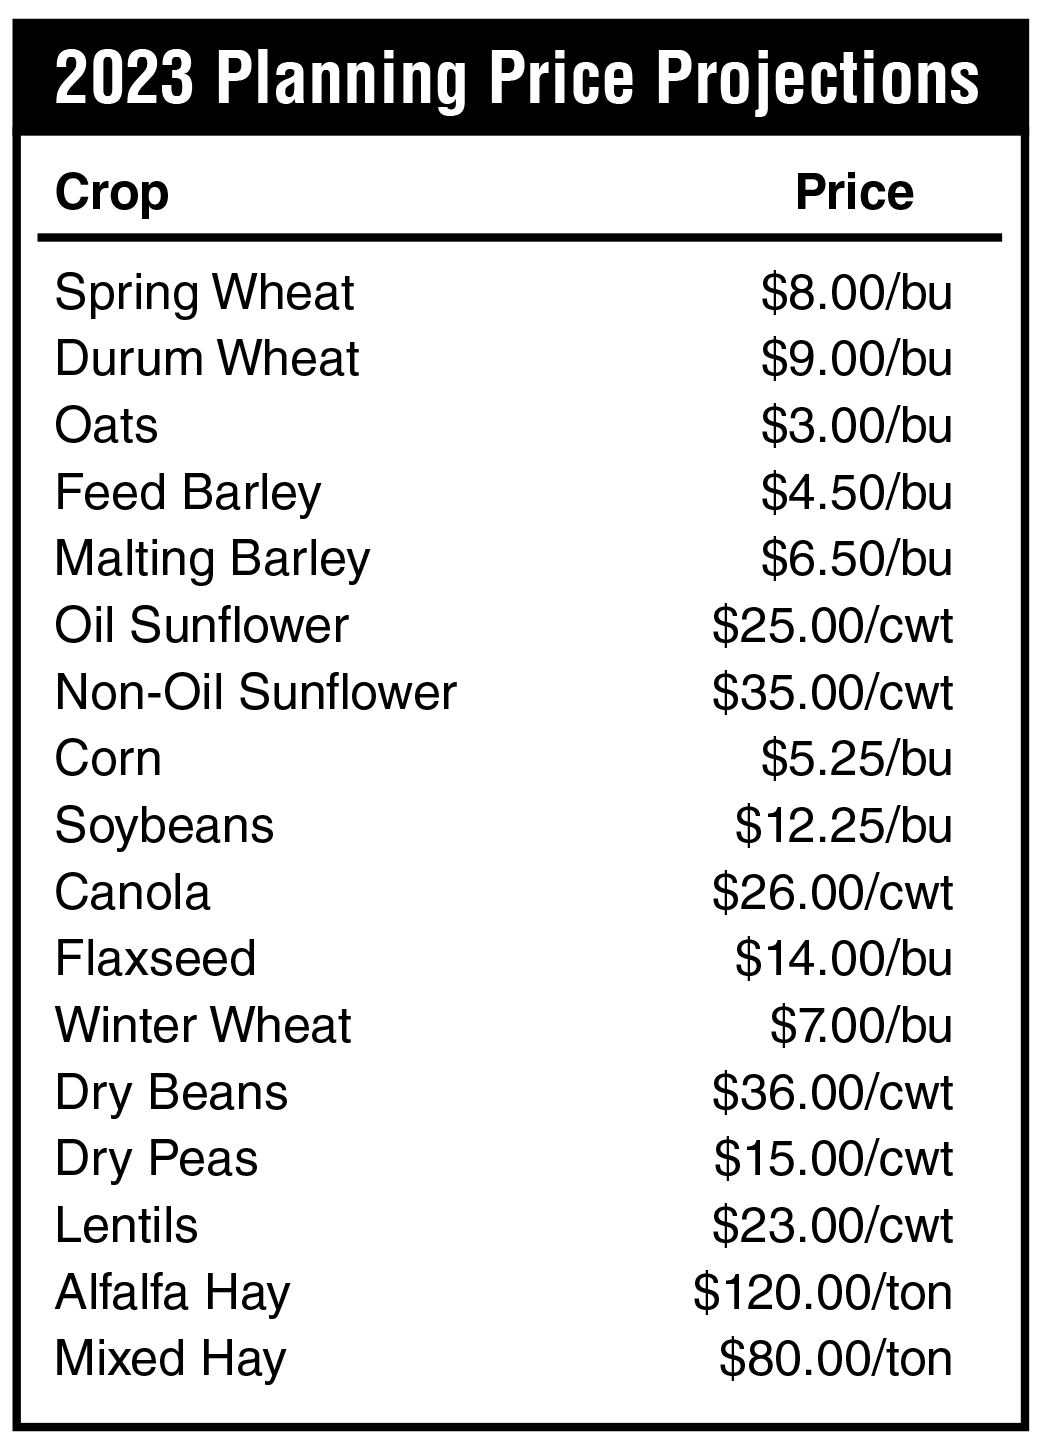 2023 Crop Planning Price Projections